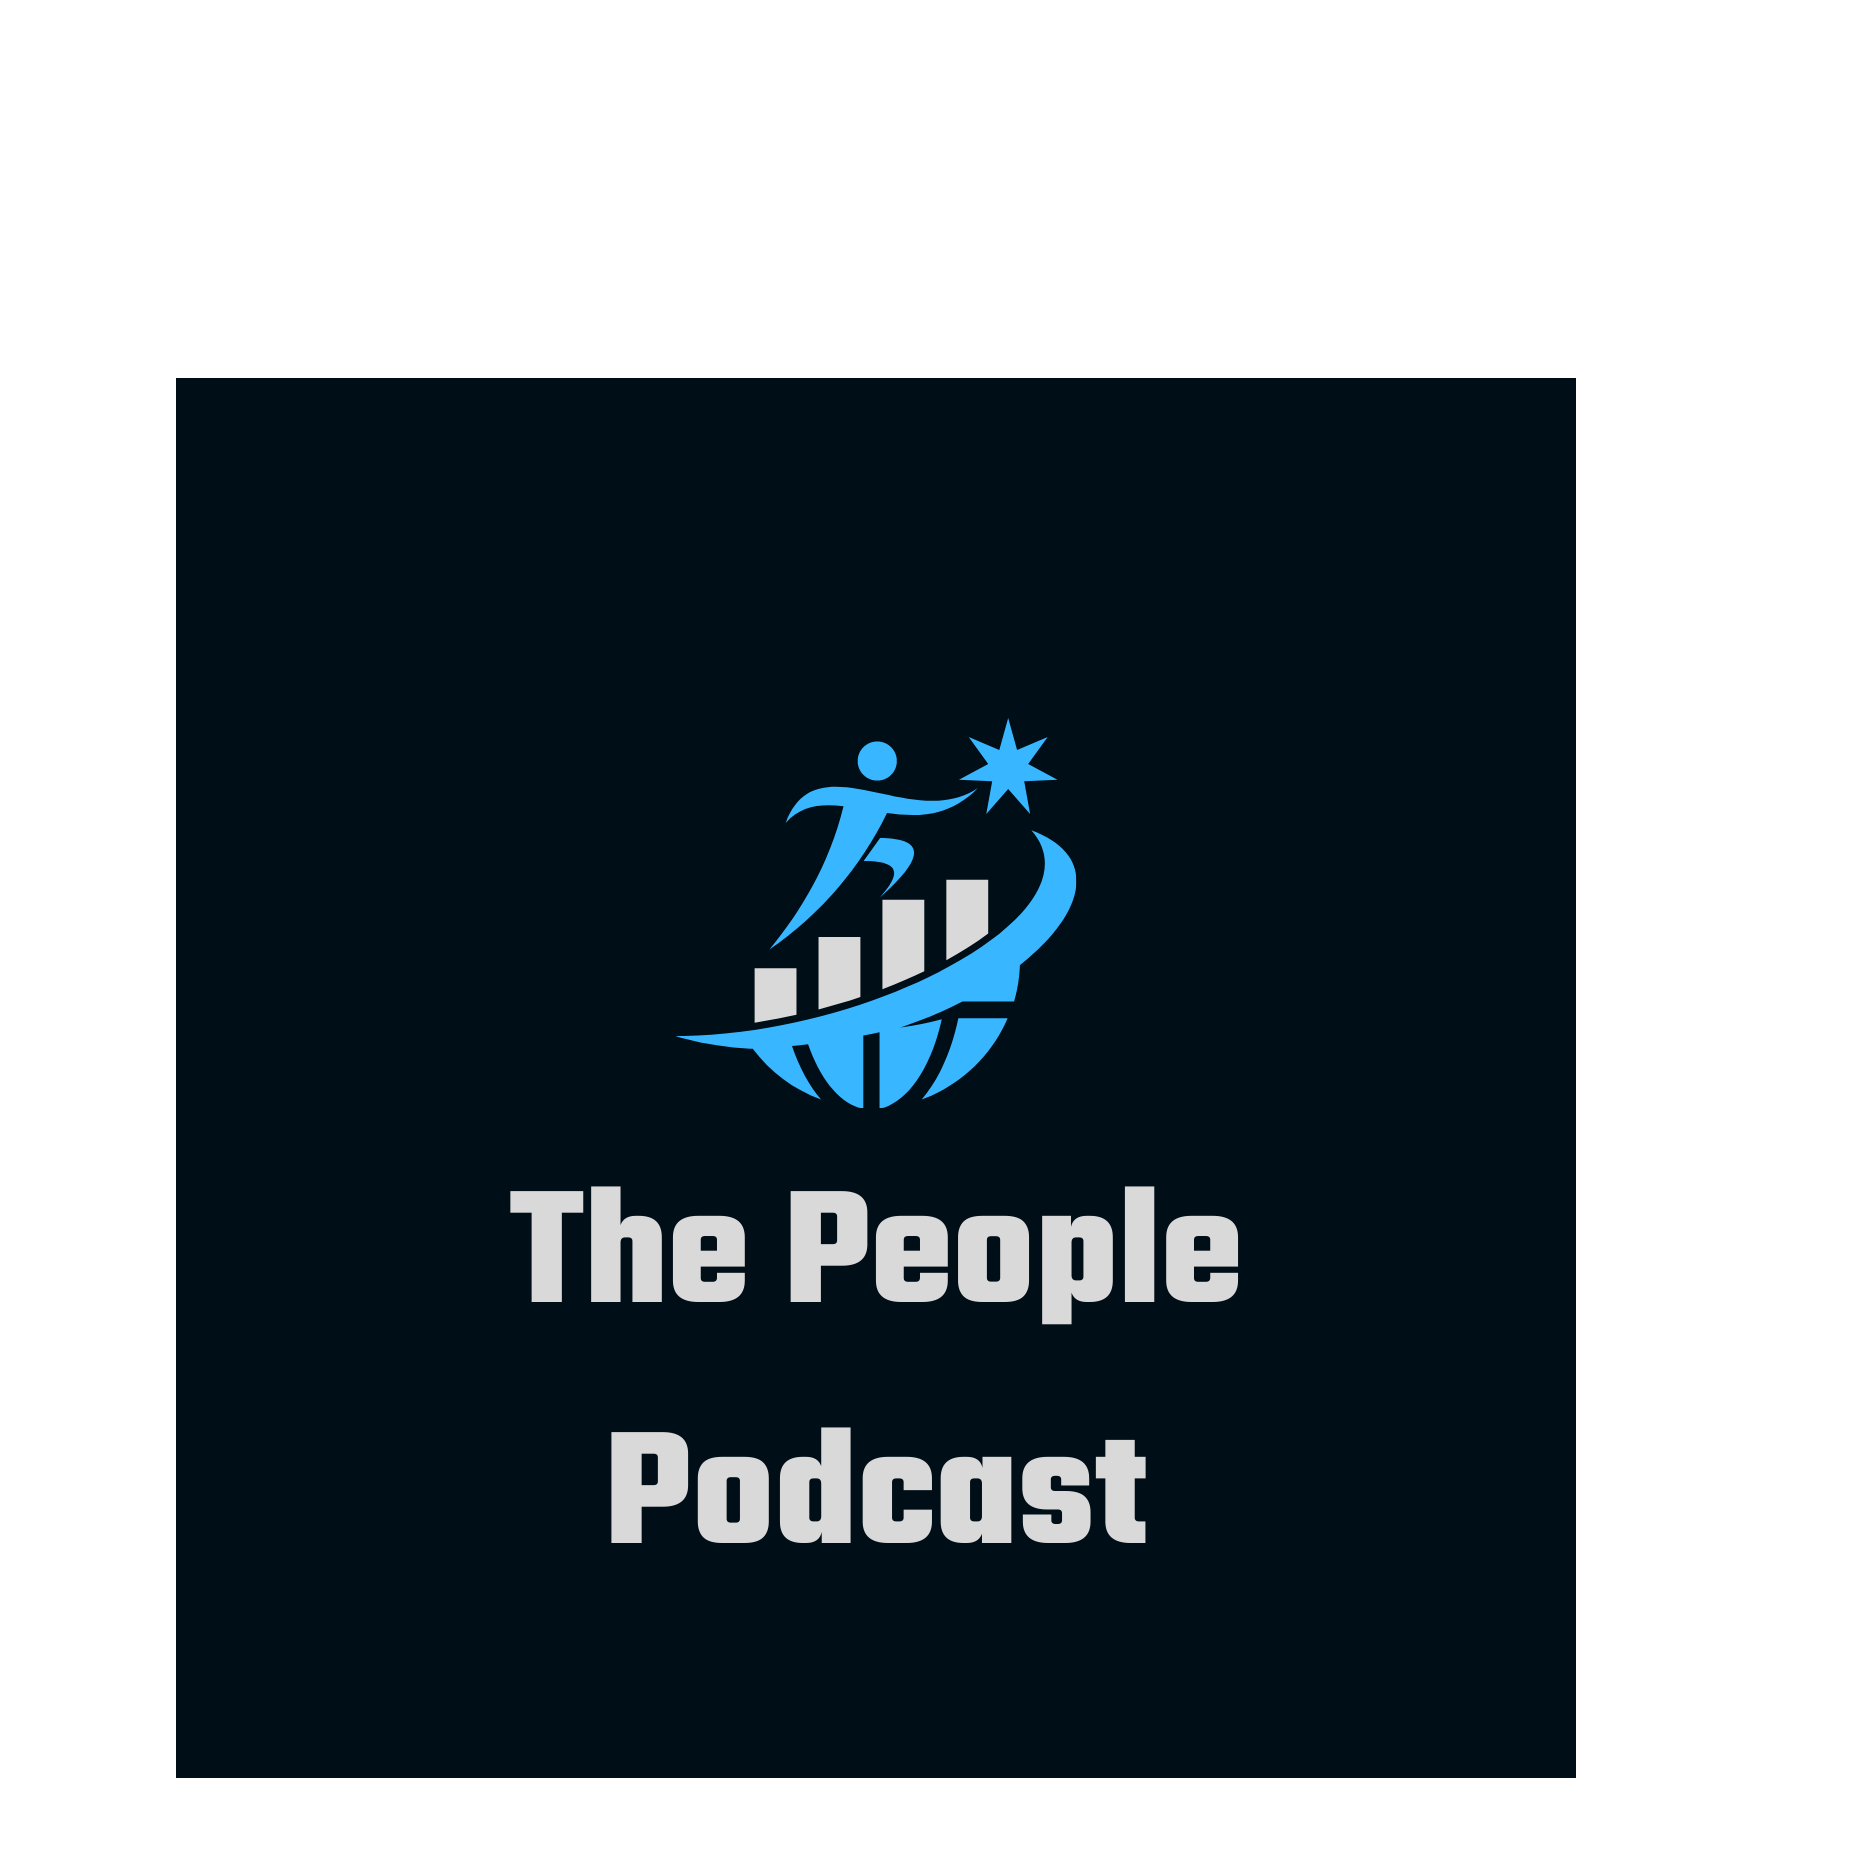 The People Podcast